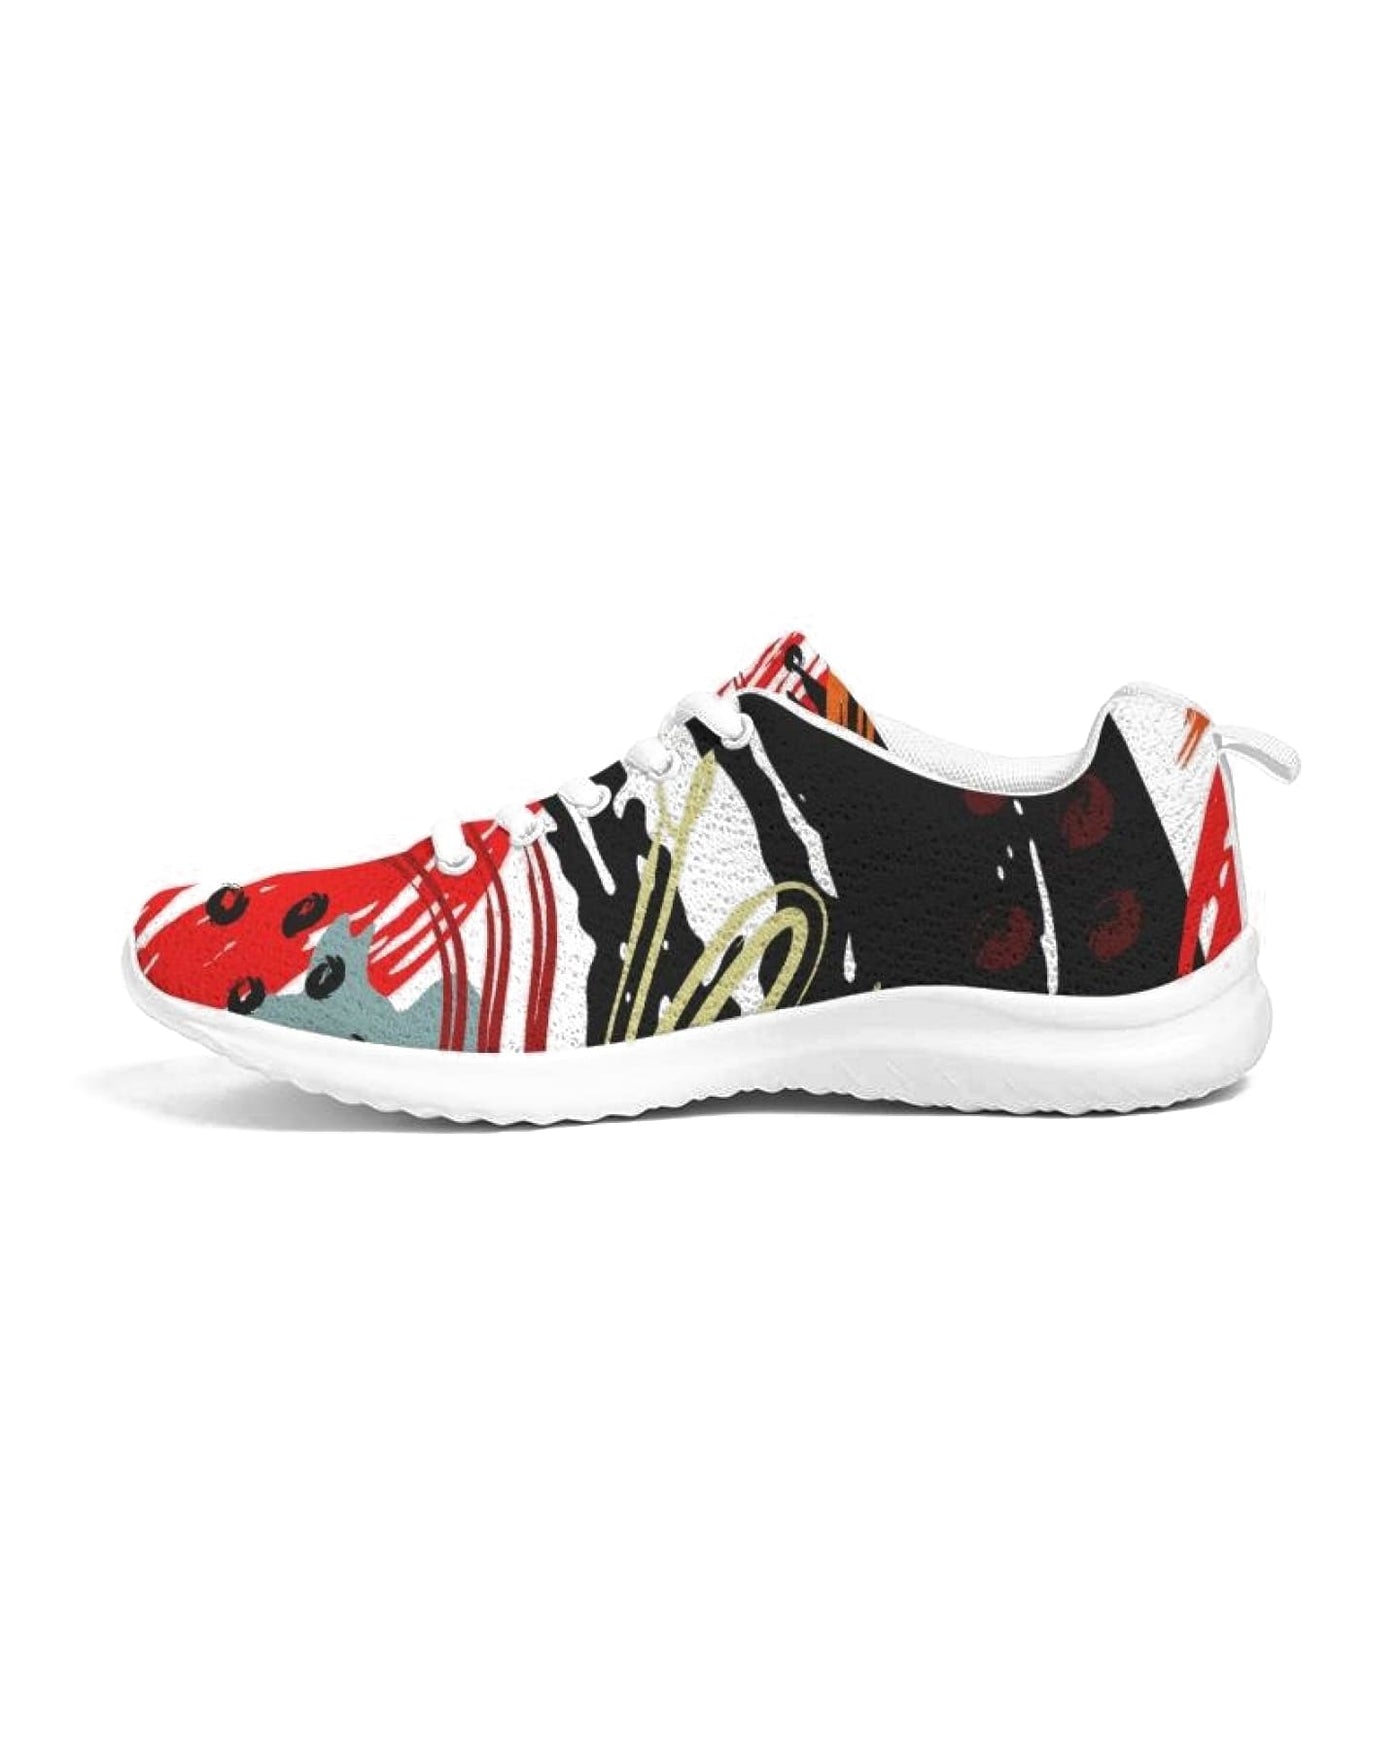 Mens Sneakers Multicolor Low Top Canvas Running Shoes - Mpe475 - Mens | Sneakers